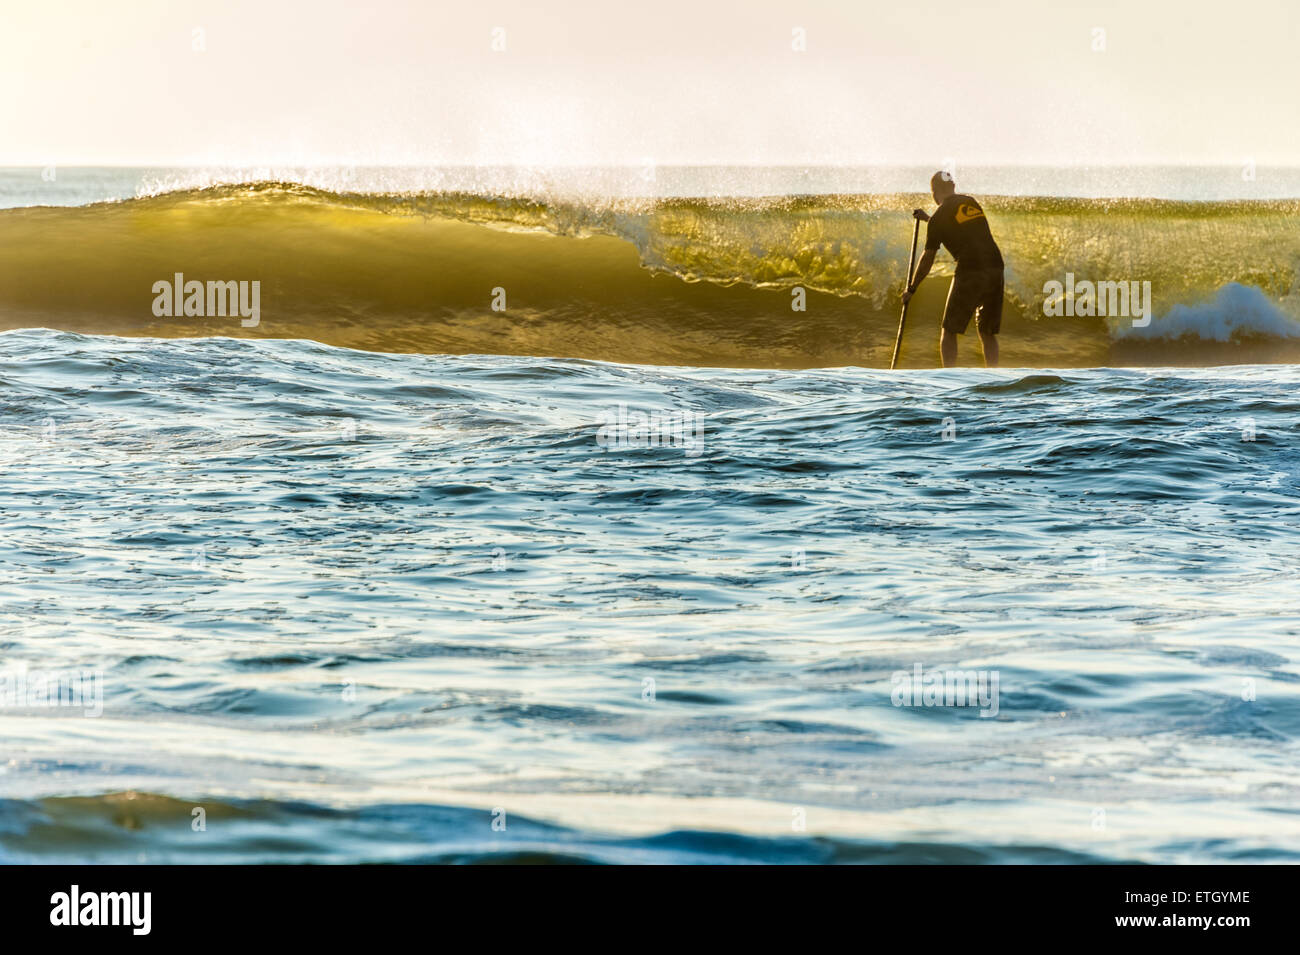 A stand-up paddleboarder faces a backlit wave as he paddle out at Jacksonville Beach, Florida just after sunrise. Stock Photo